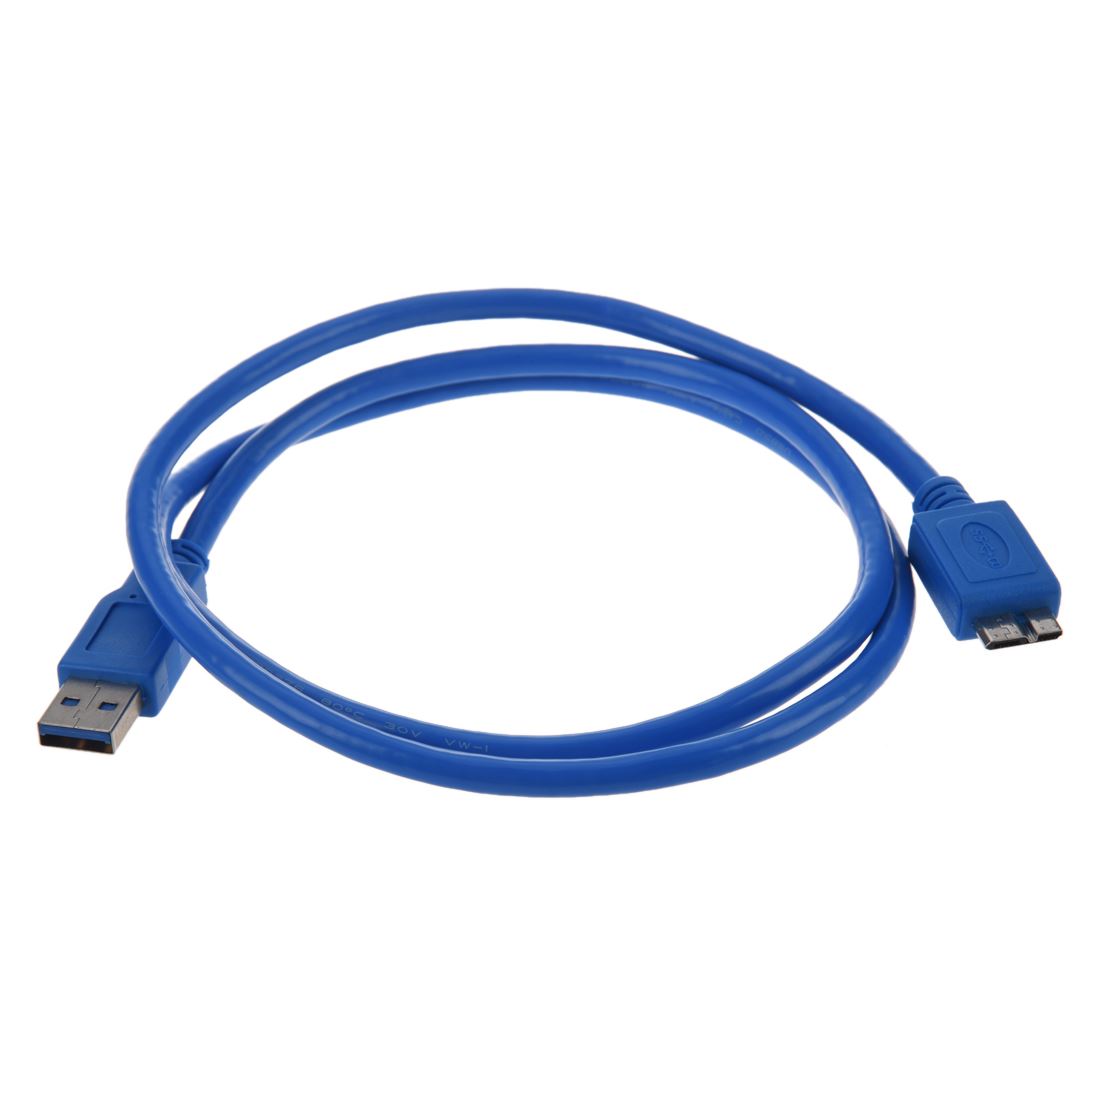 SuperSpeed USB 3.0 Cable, Type A to Type B Micro, M / M, 3 F